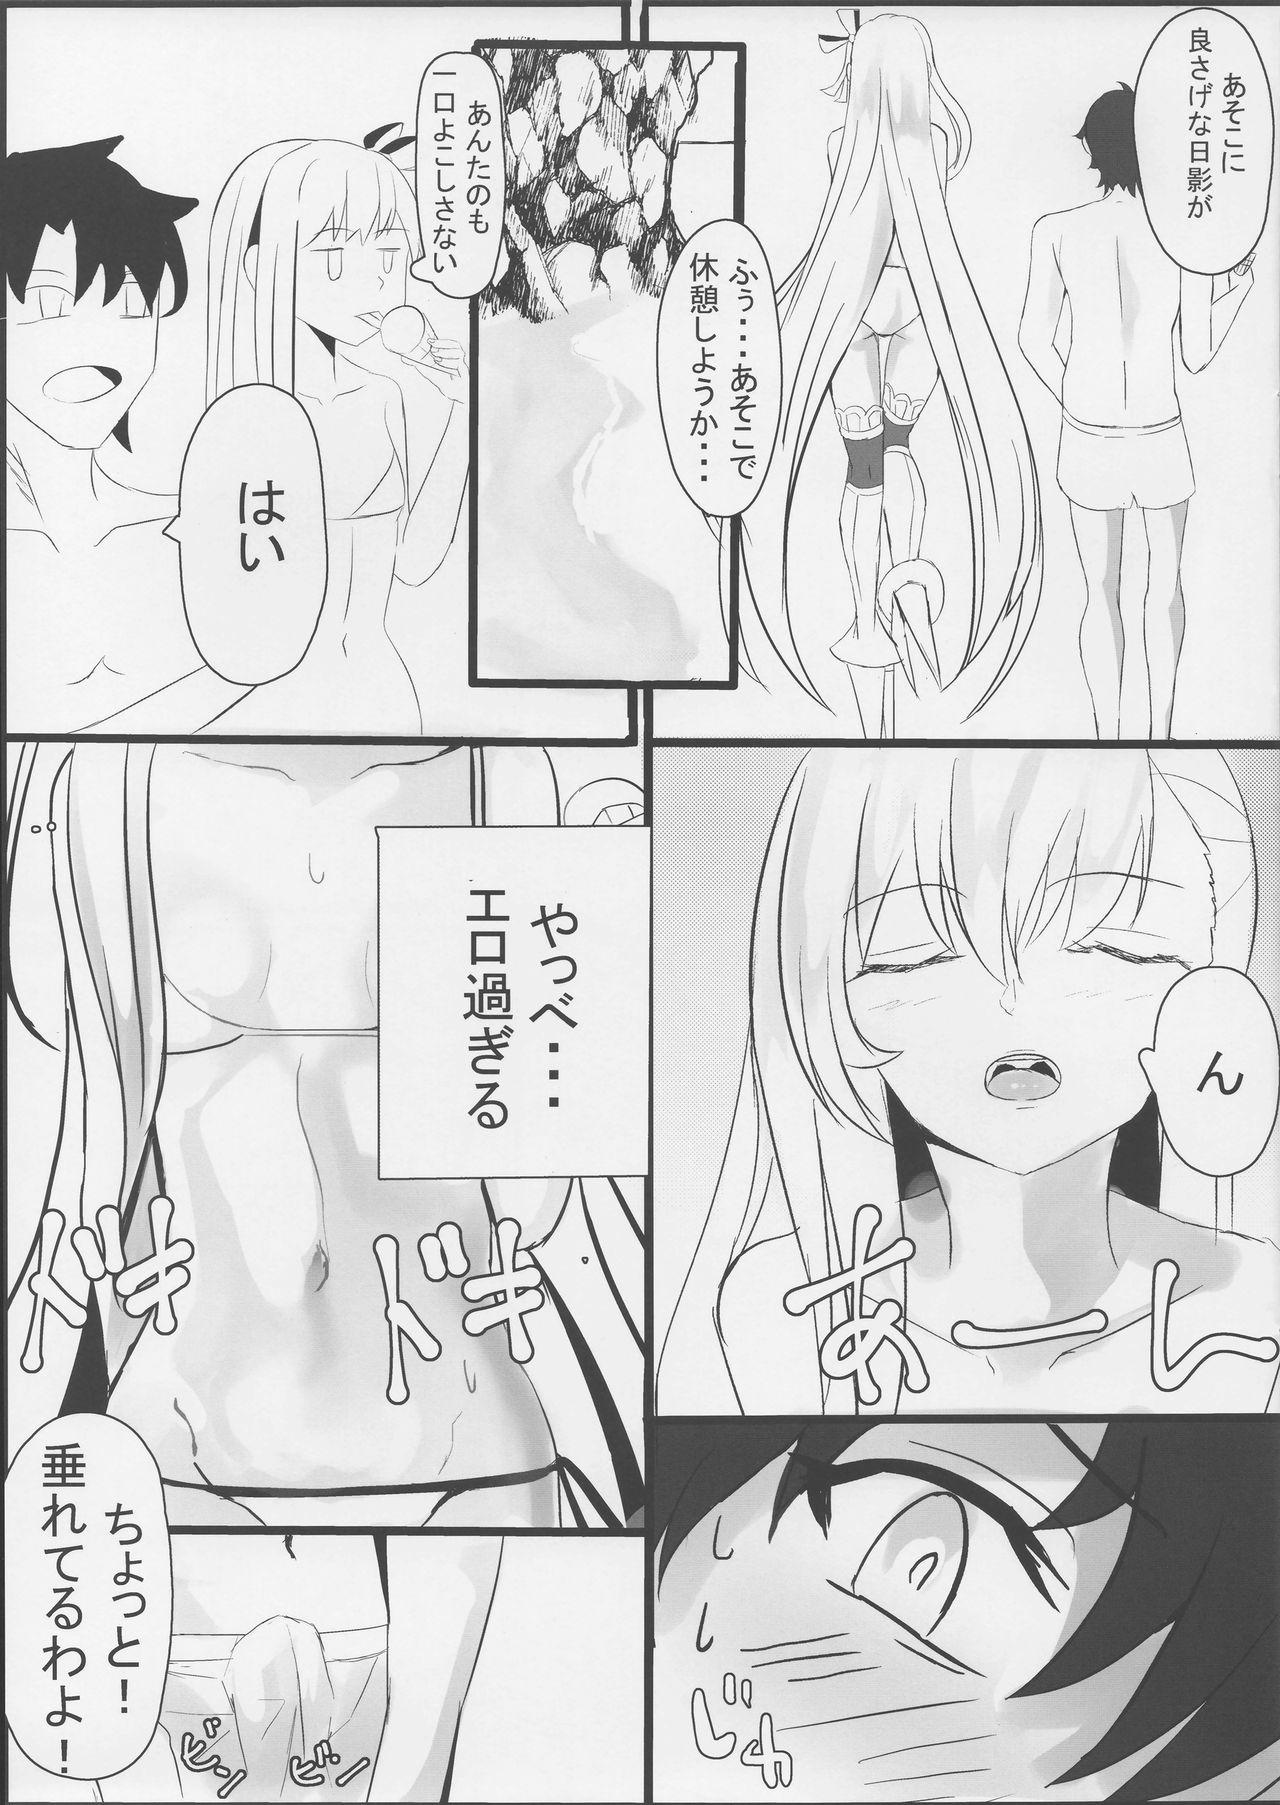 Usa Melt down 2 - Fate grand order Culos - Page 6